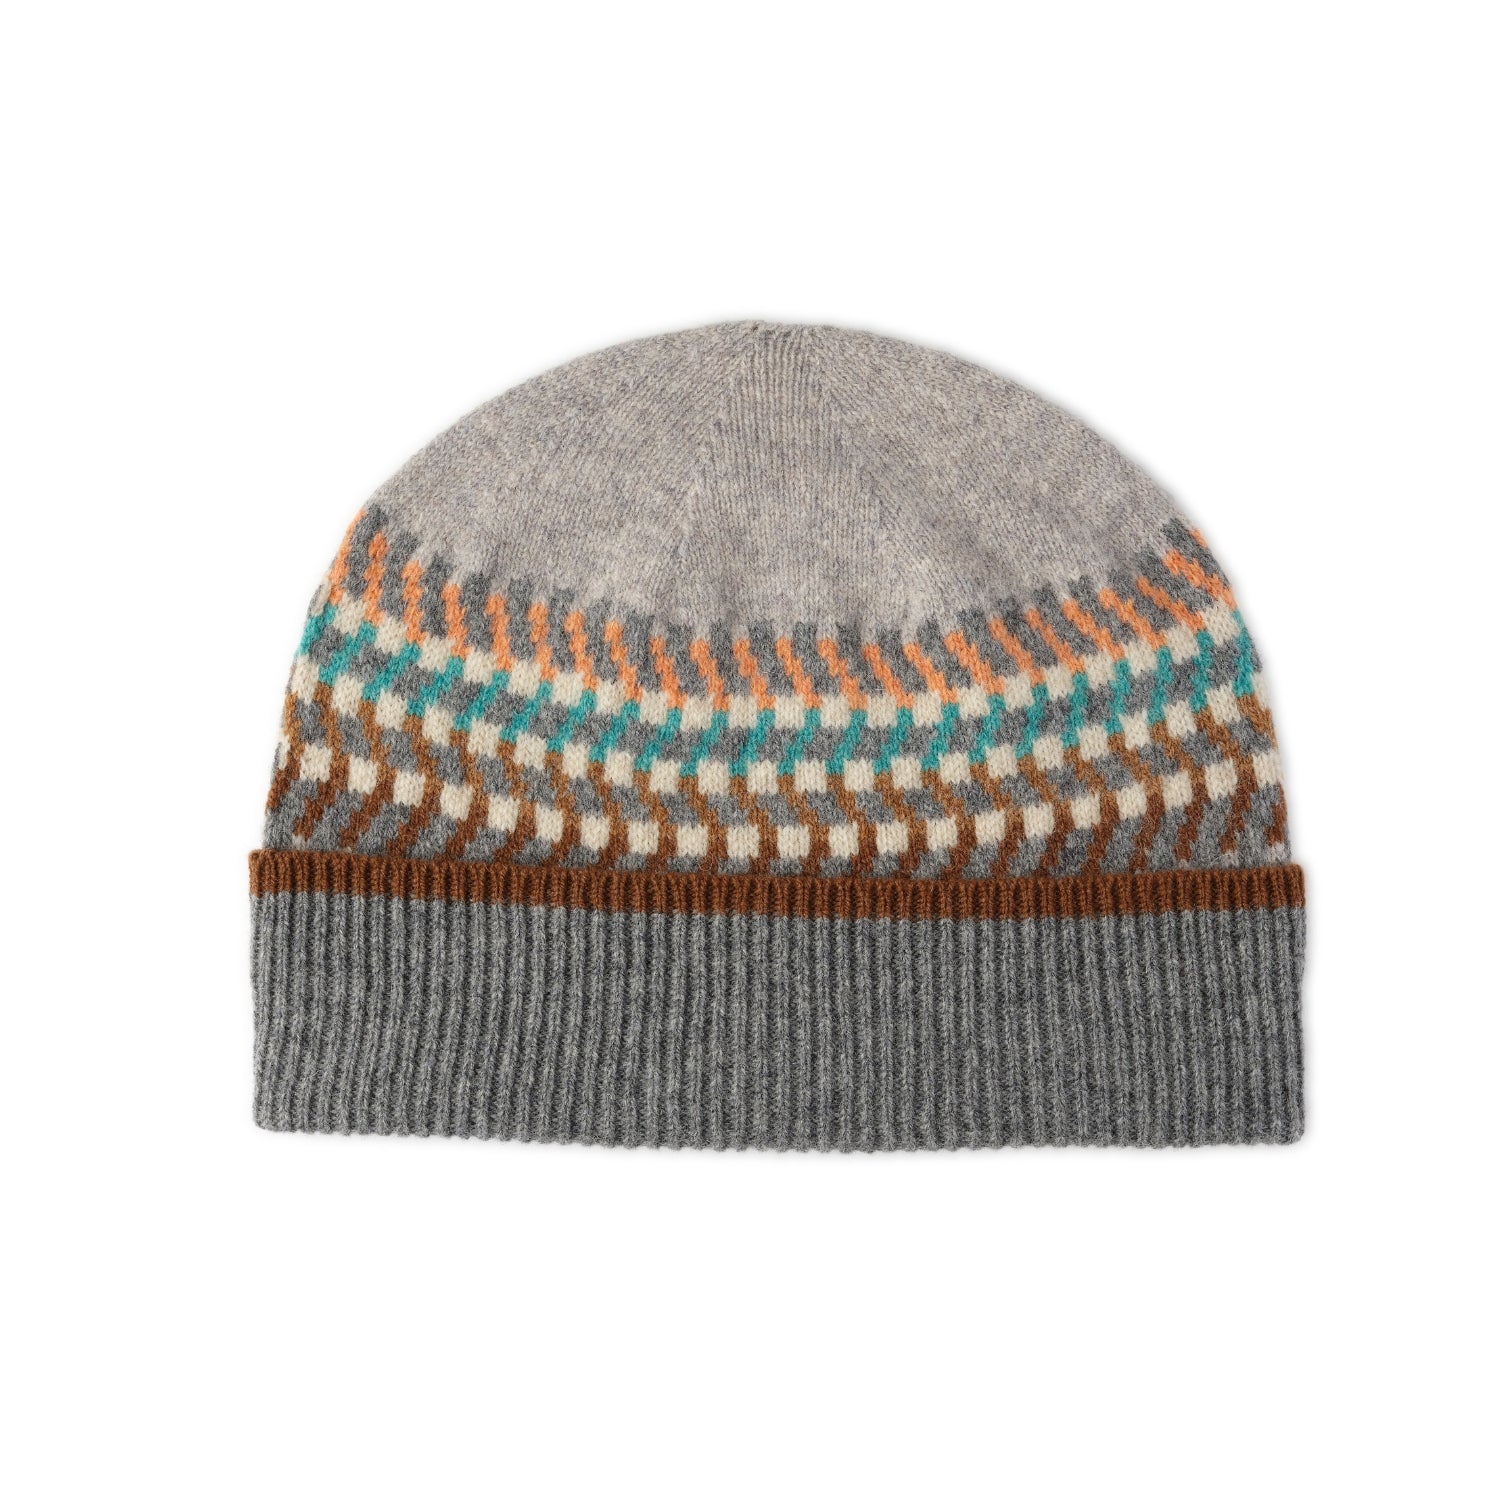 womens wool beanie hat in contemporary design - grey